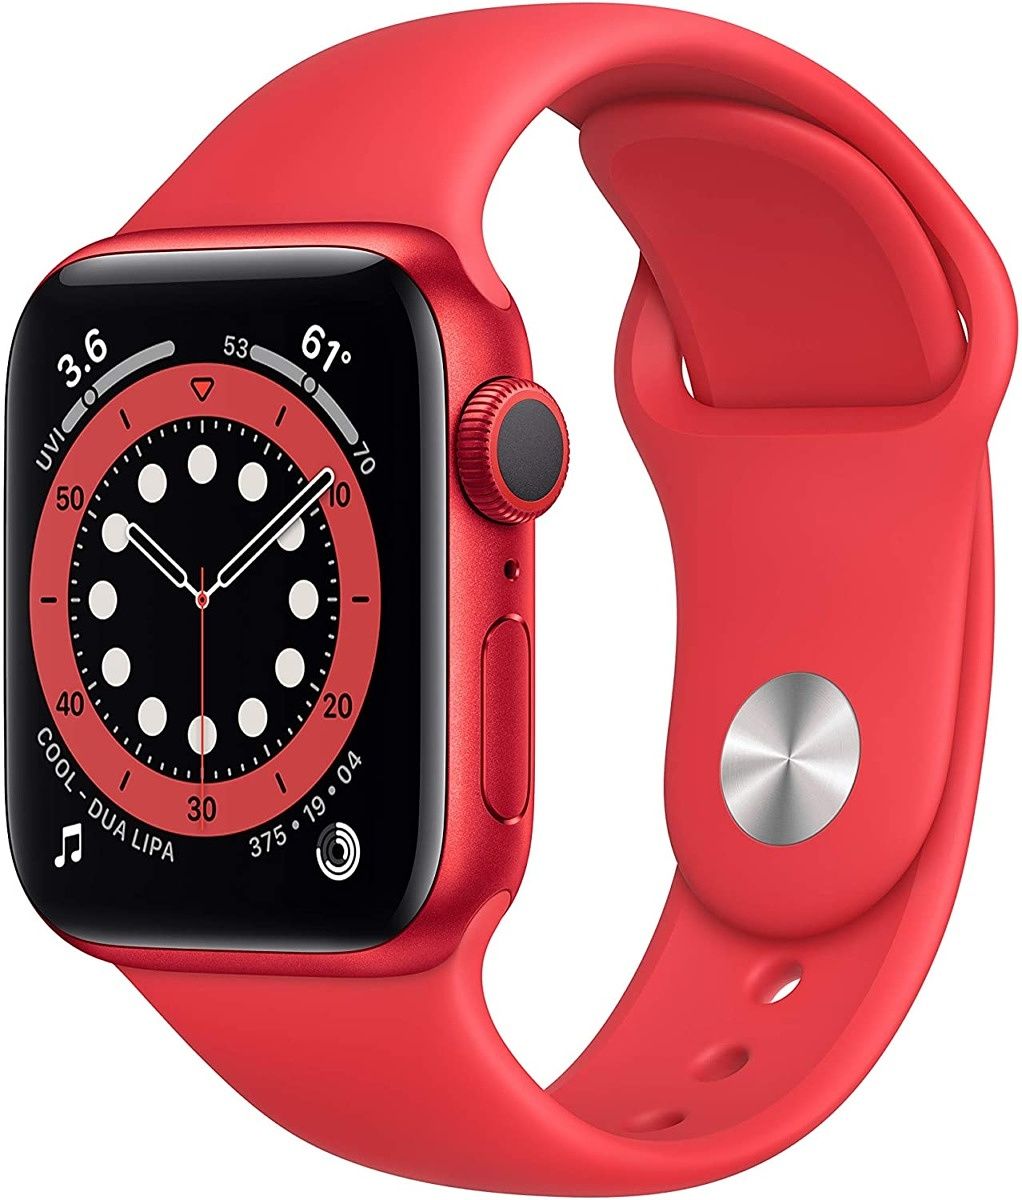 Amazon-owned Woot is selling the red 40mm Apple Watch for $299.99, $100 below the original MSRP. Prime subscribers get free standard shipping. The sale ends today (8/7), or whenever stock runs out.